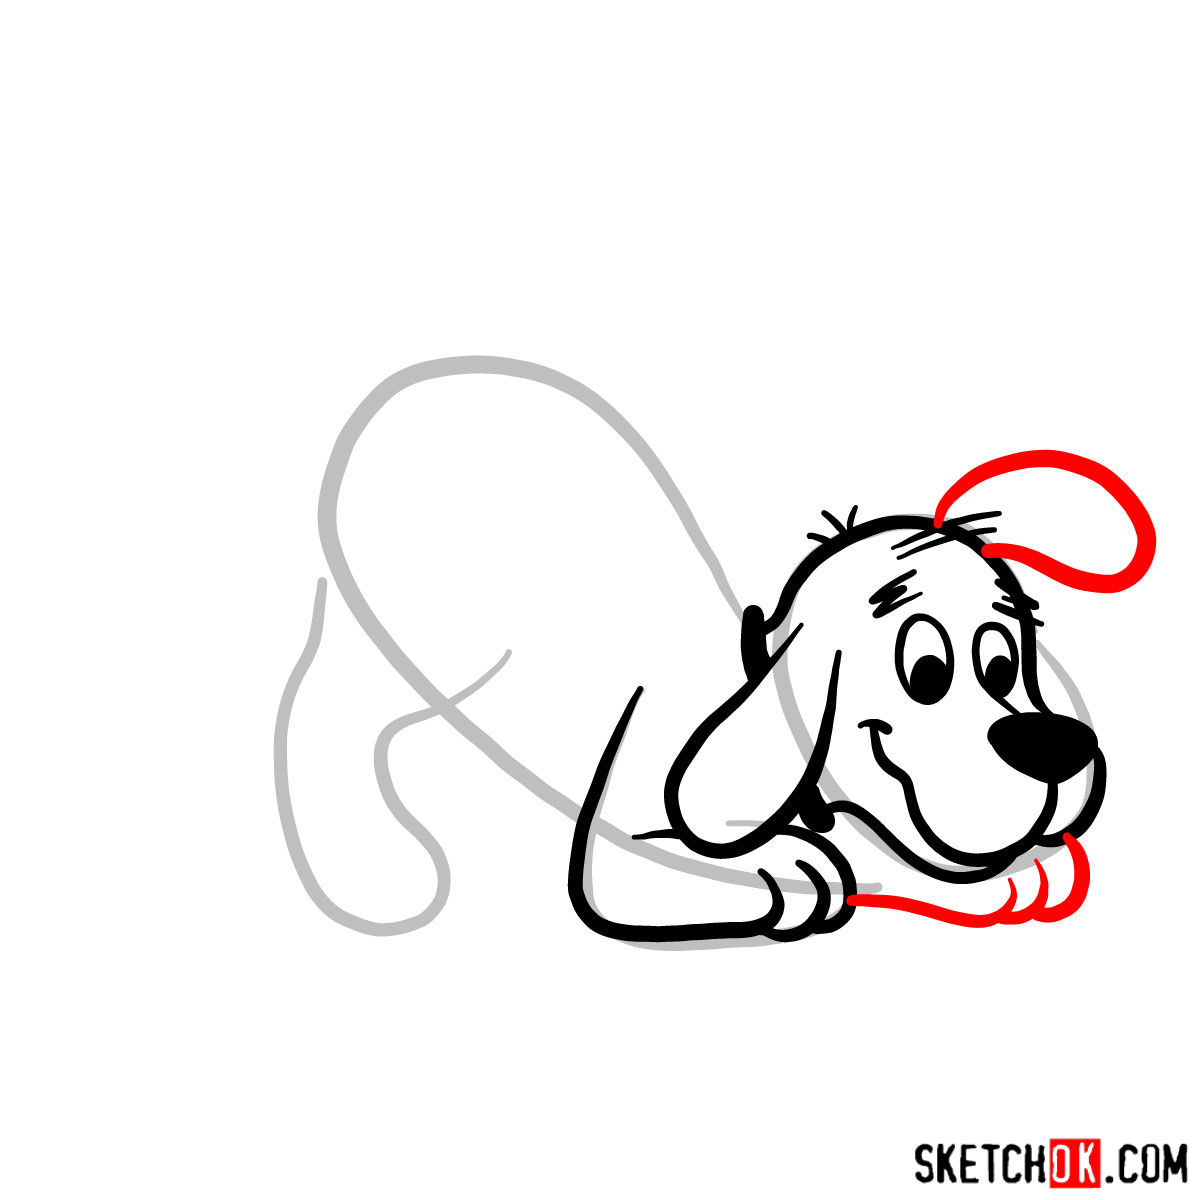 How to draw Clifford the Big Red Dog - step 05